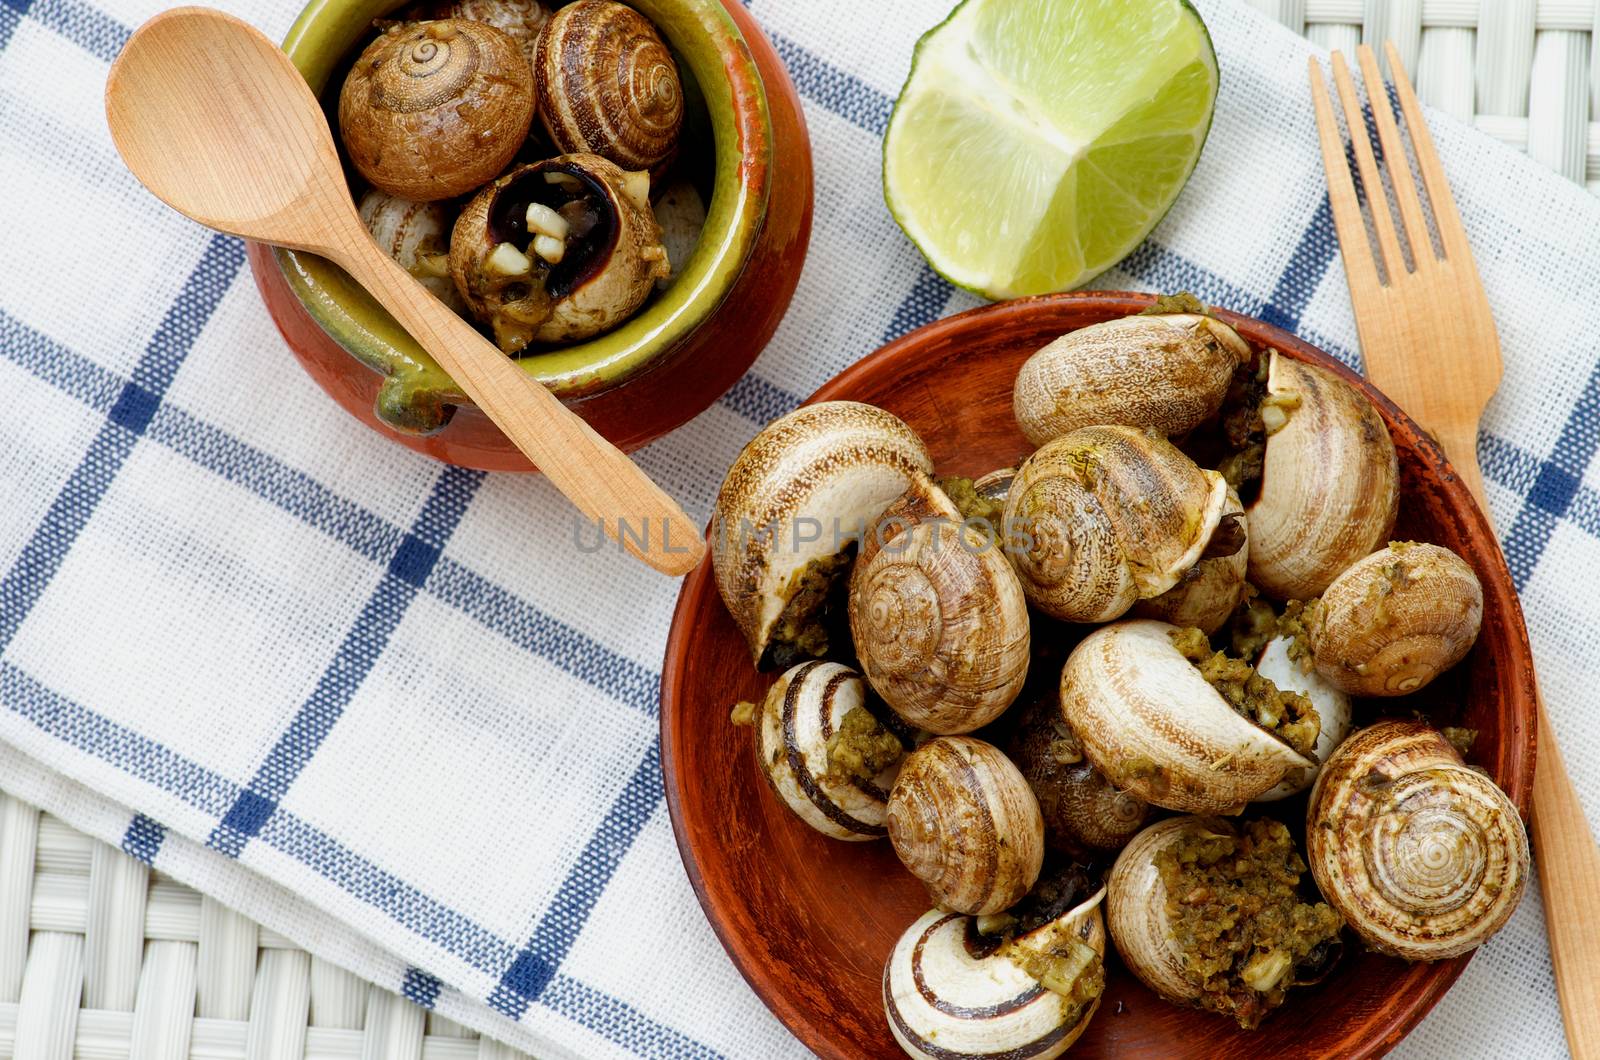 Delicious Escargot with Garlic Butter in Two Plates with Wooden Fork, Wooden Spoon and Lime closeup on Checkered Napkin